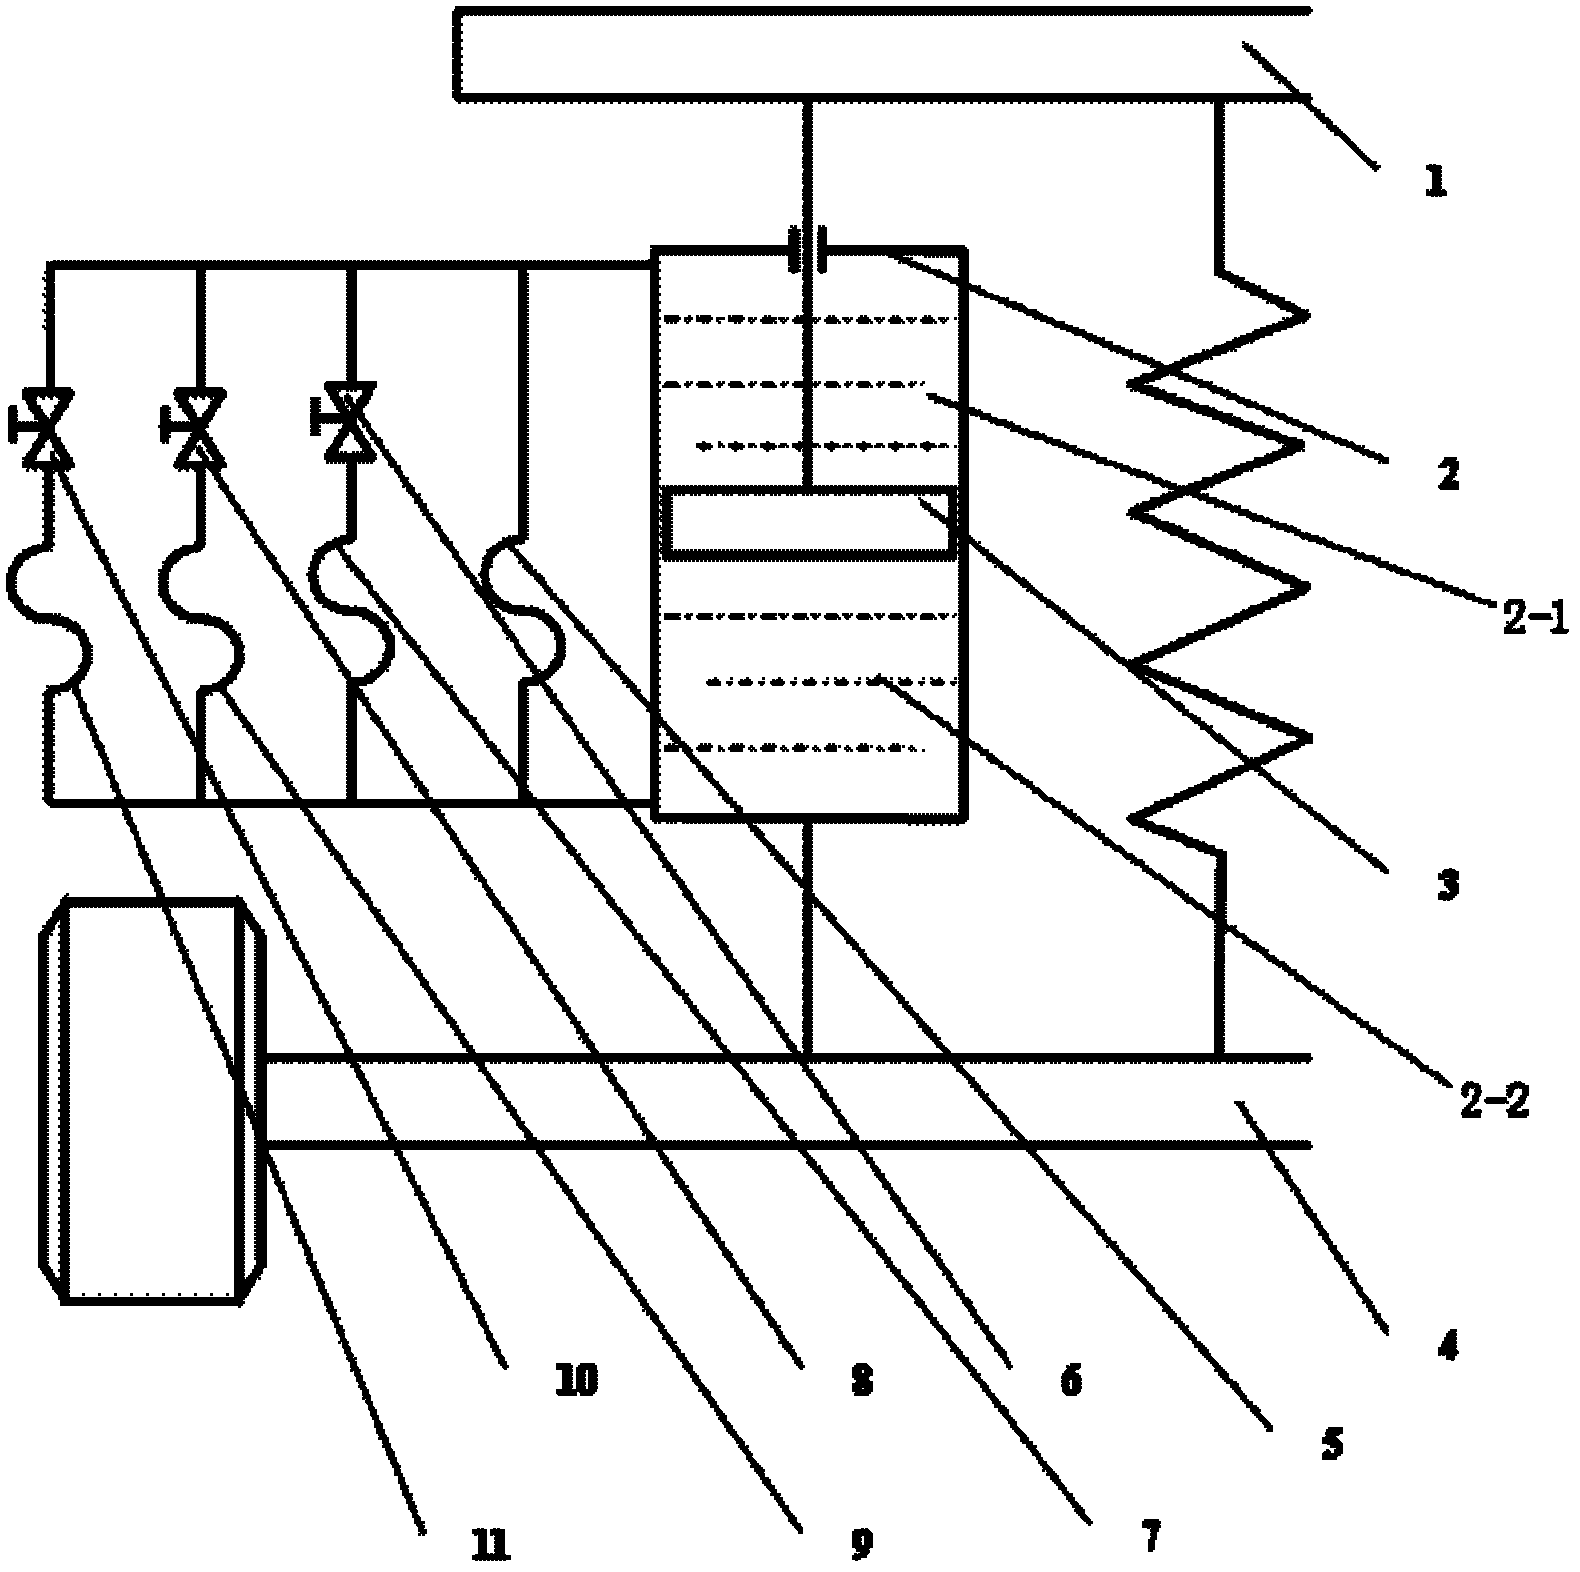 Damp-variable automobile damper with capillary tubes in parallel connection